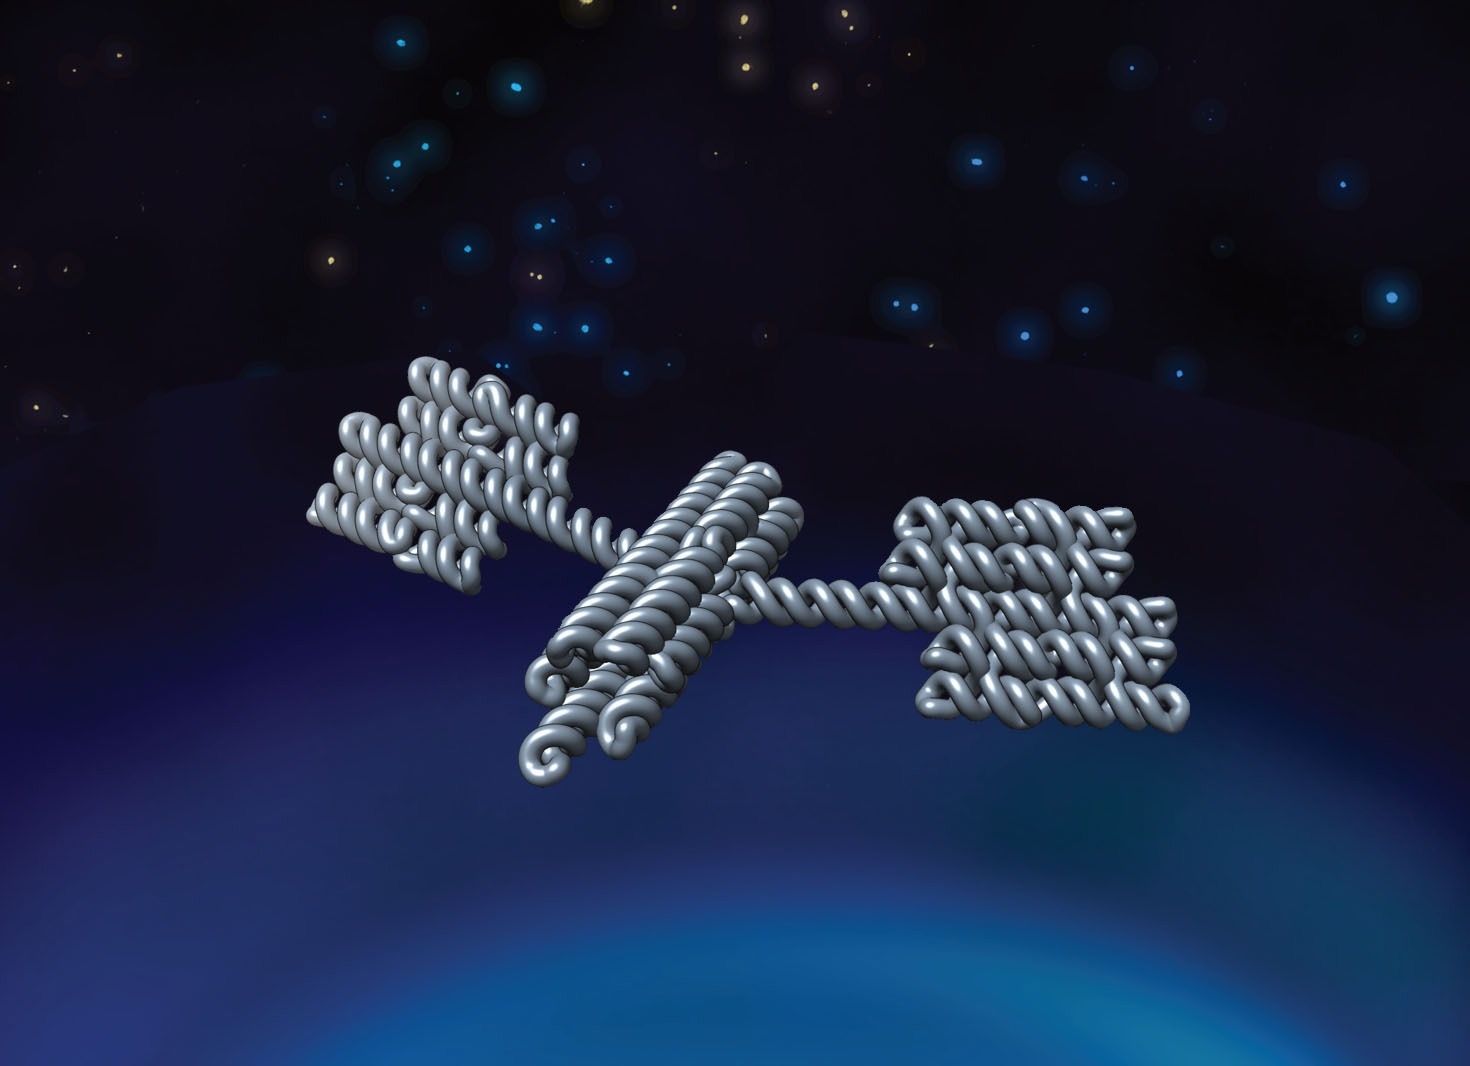 "Nanosatellite explores folding space". Artist rendering by Cody Geary showing an RNA satellite exploring the possibilities for folding and applications in nanomedicine and synthetic biology.